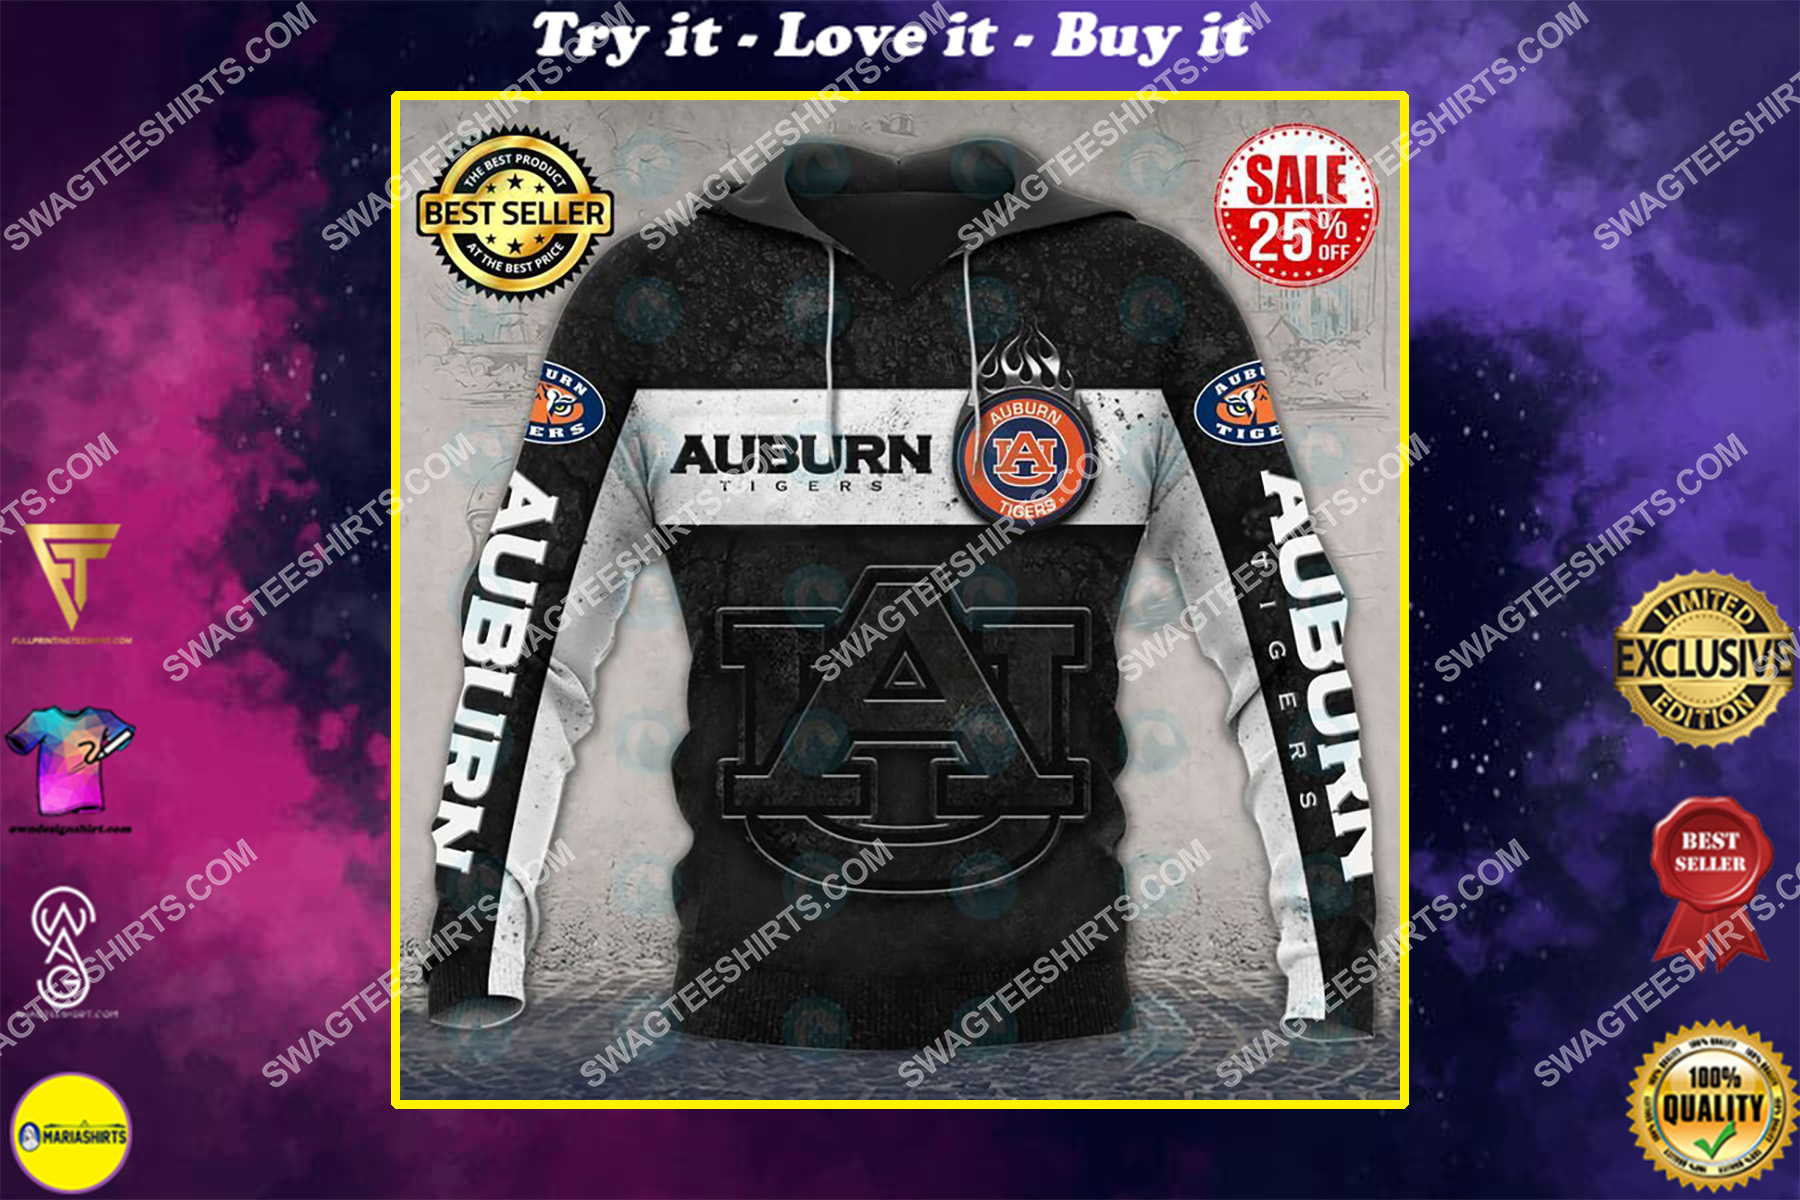 the auburn tigers football all over printed shirt